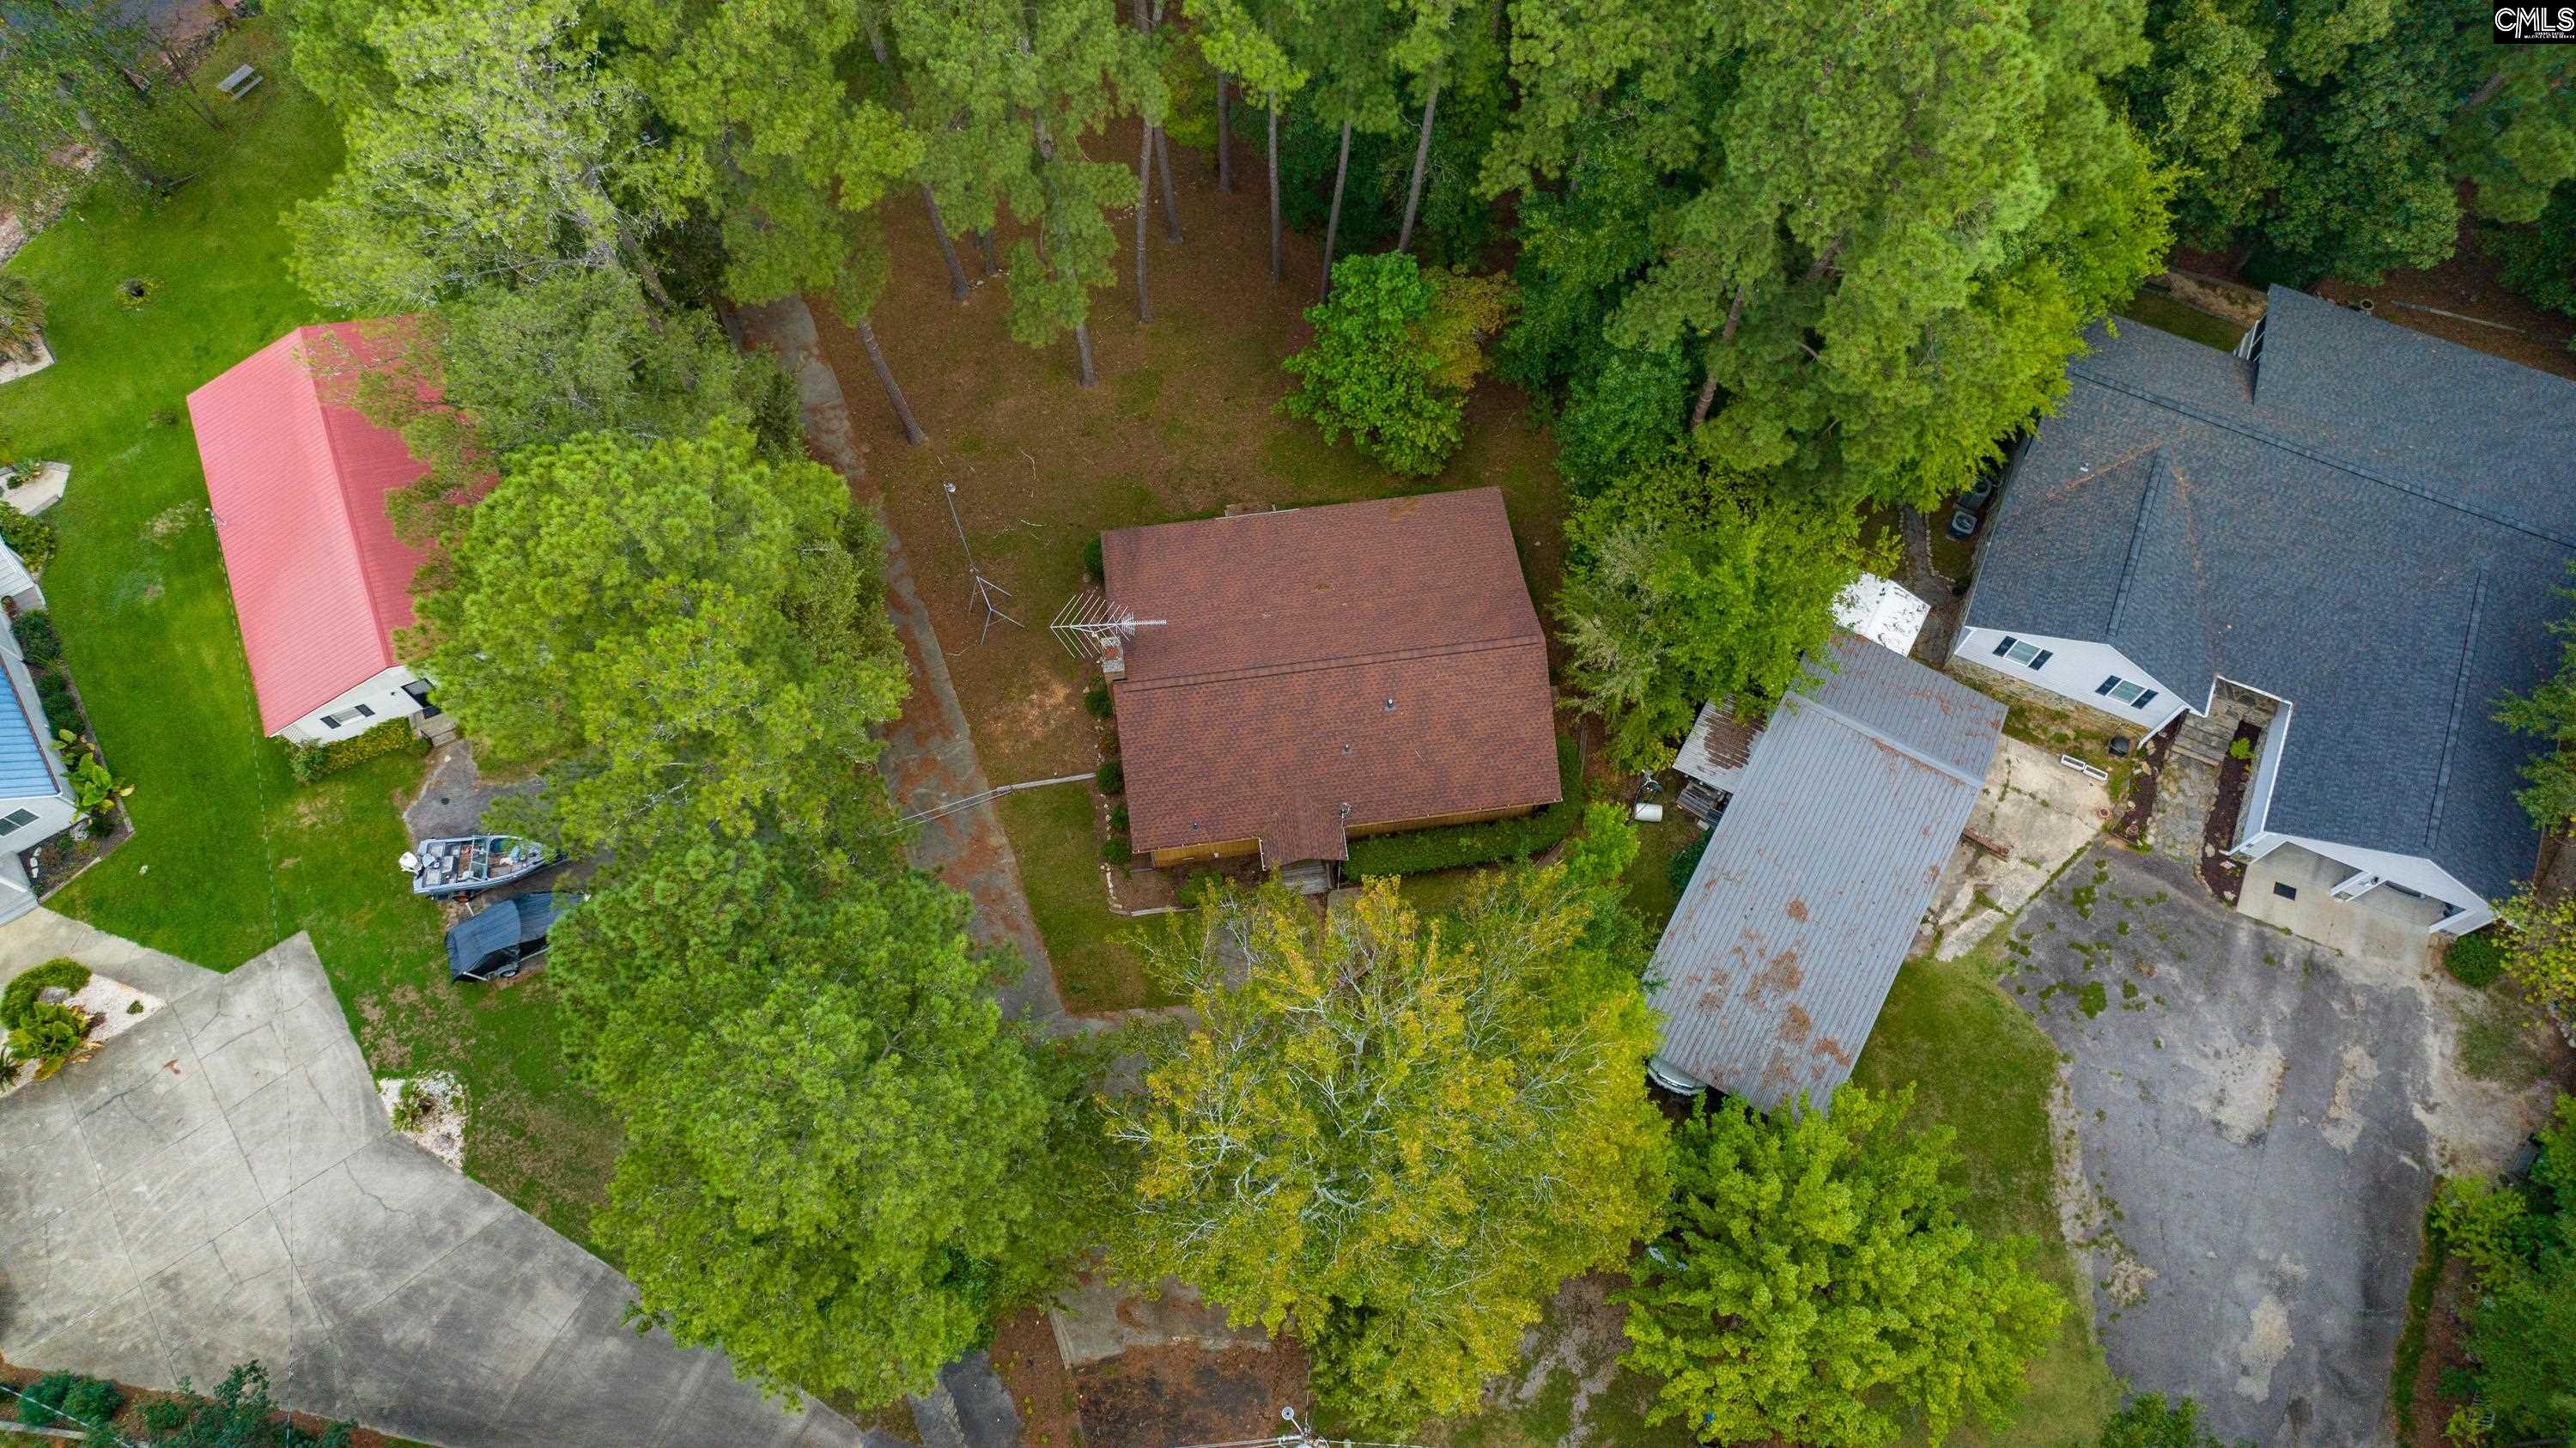 4452 HOLLEY FERRY Road, Leesville, SC 29070 Listing Photo 2